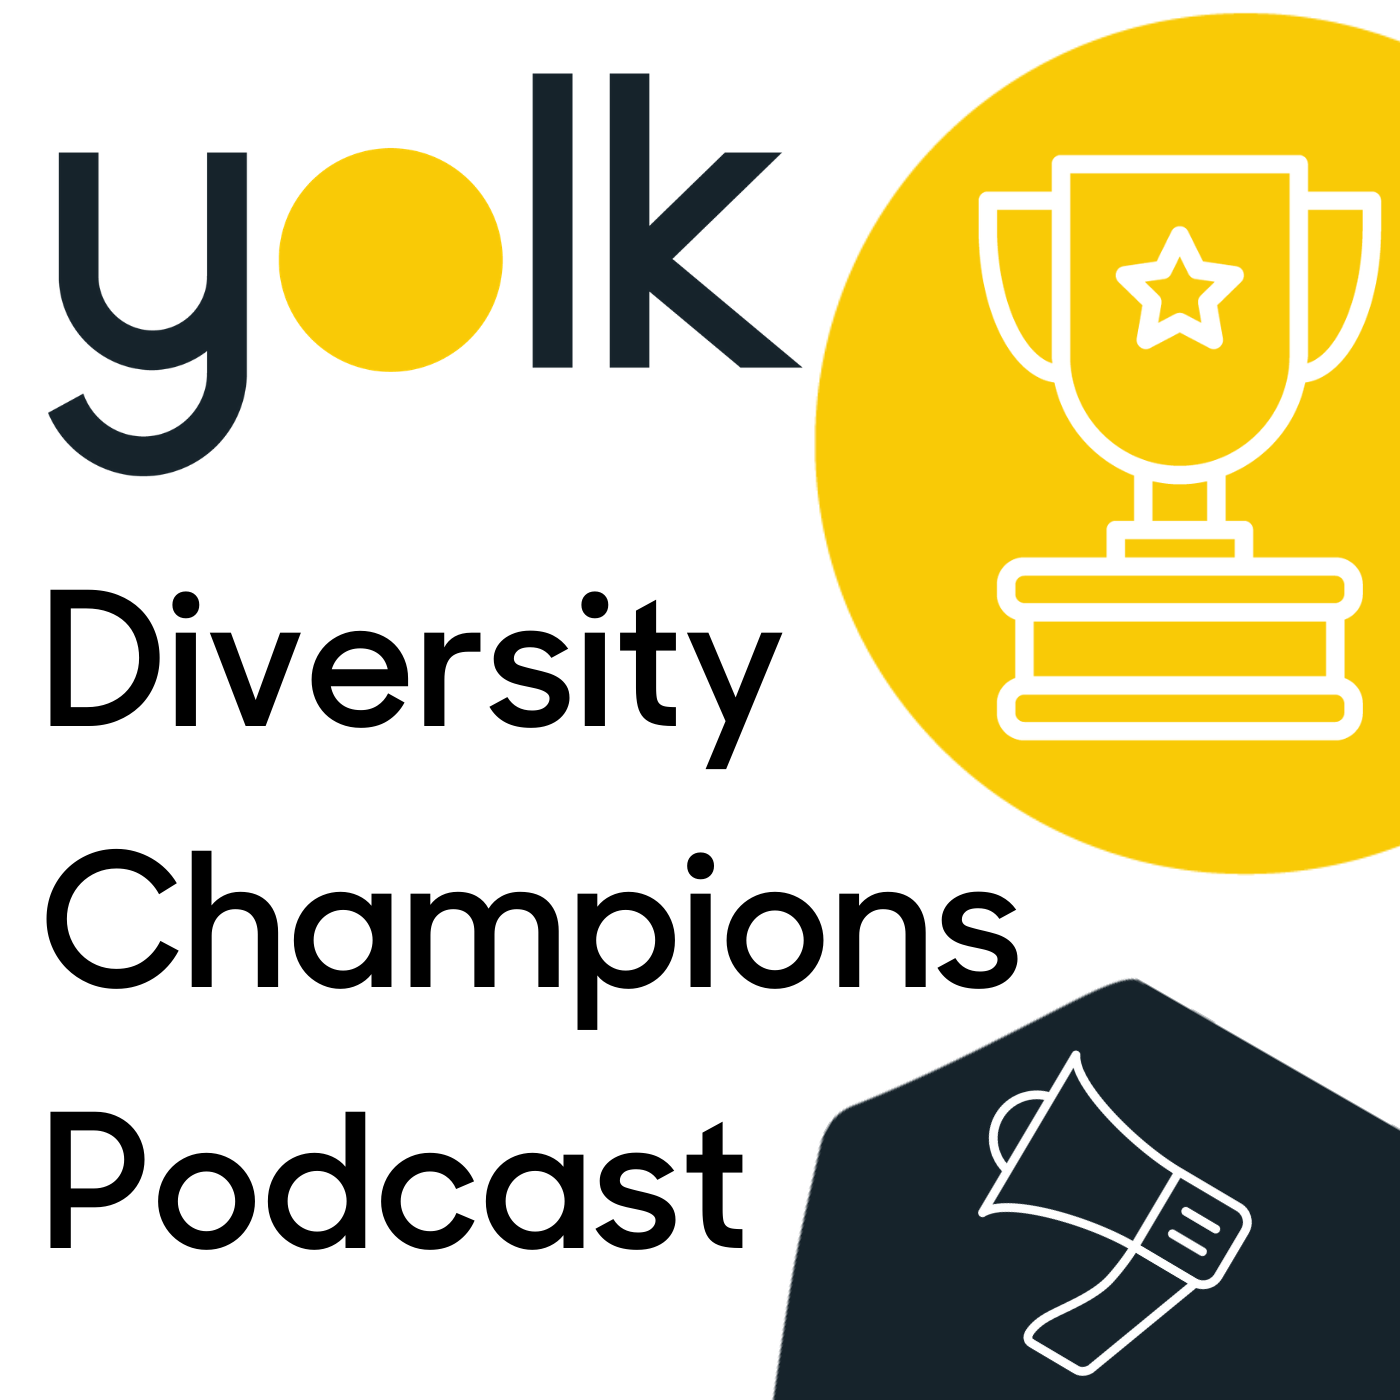 The Yolk Podcast - home to Diversity Champions